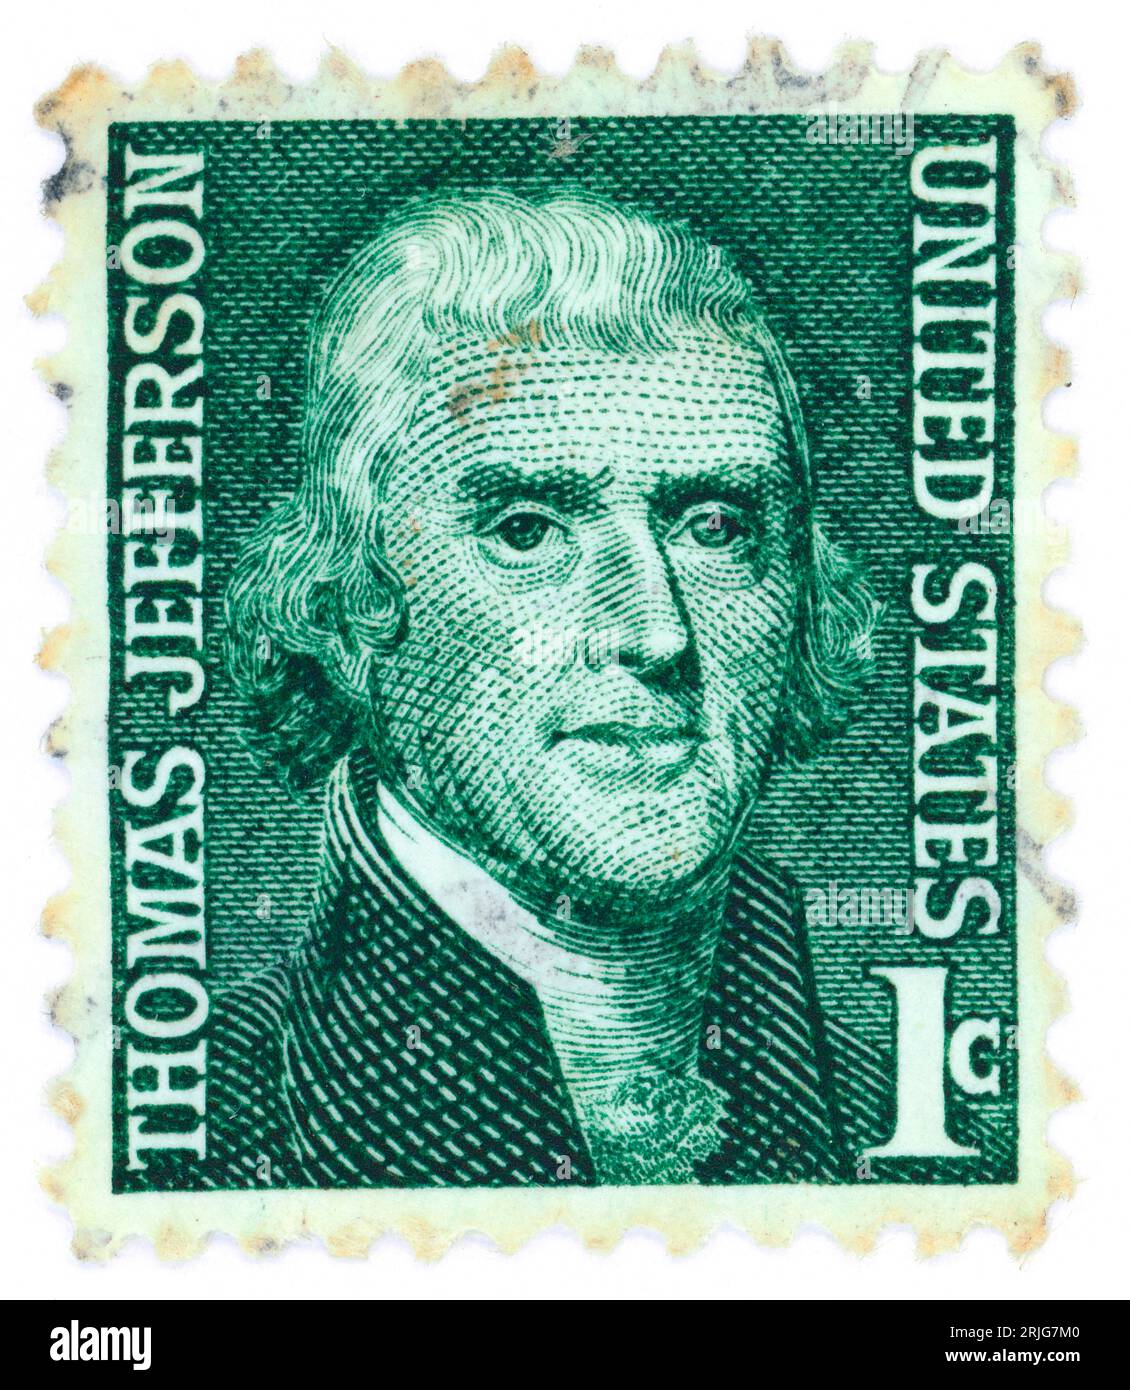 Thomas Jefferson (1743 – 1826). Postage stamp issued in the US in 1968. Thomas Jefferson was an American statesman, diplomat, lawyer, architect, philosopher, and Founding Father who served as the third president of the United States from 1801 to 1809. Among the Committee of Five charged by the Second Continental Congress with drafting the Declaration of Independence, Jefferson was the document's primary author. Stock Photo